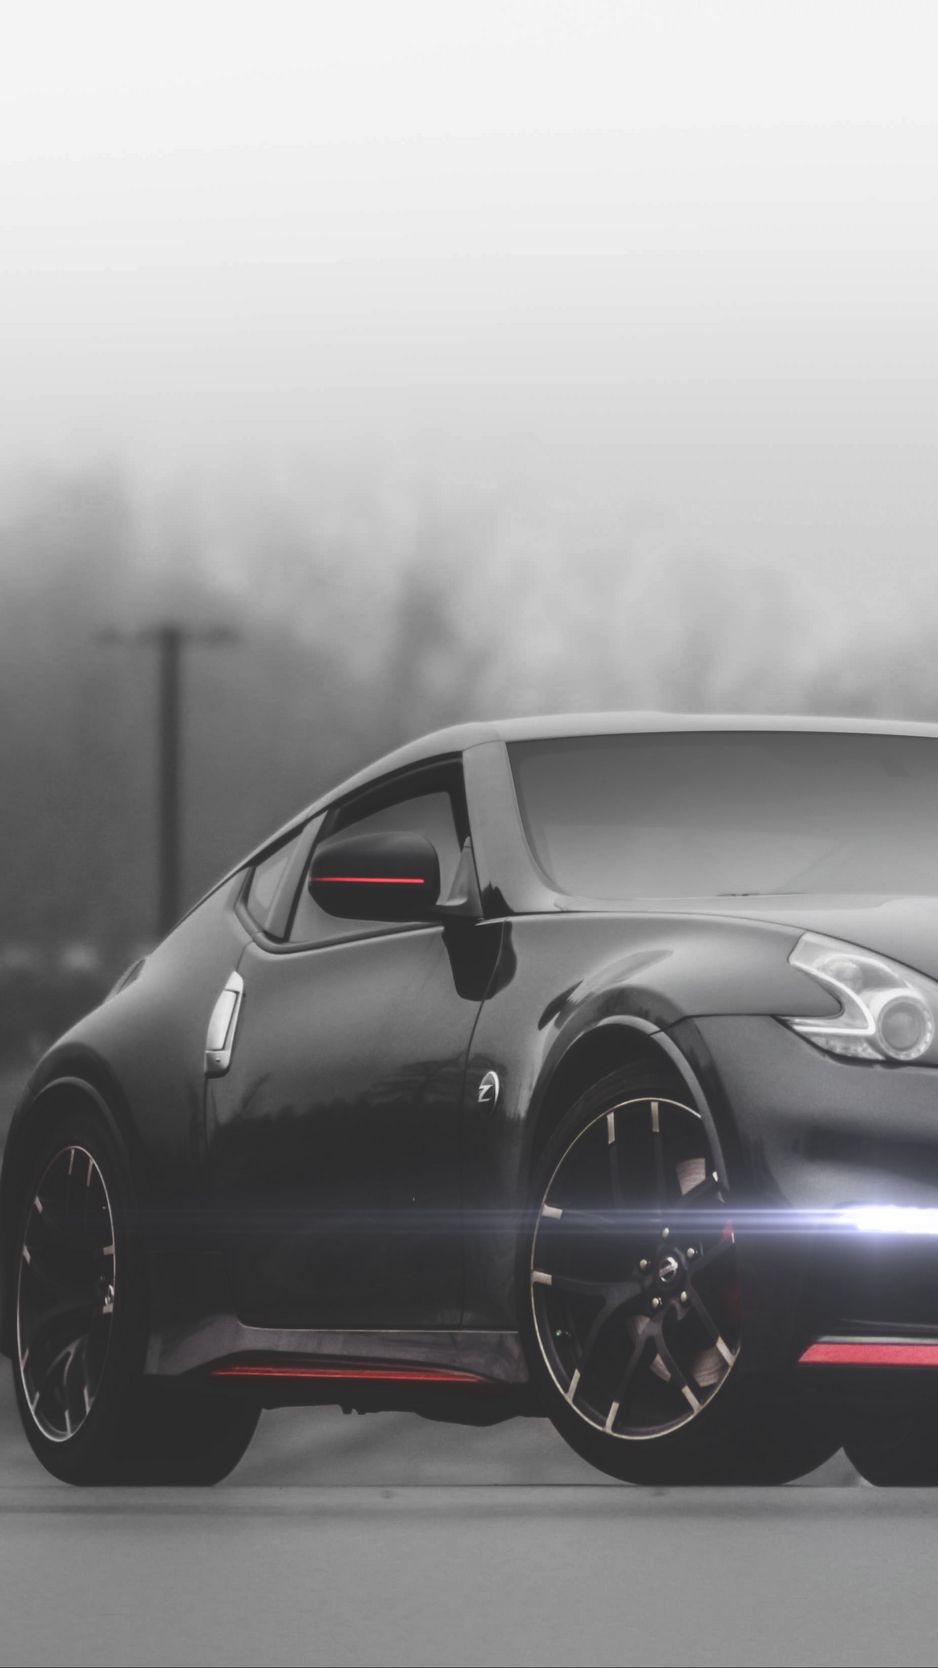 SAAKO Art Poster Supercar 370Z White Car HD Wallpaper Prints Wall Art  Modern Painting For Home Living Room Decor23.6x31.5 in(60x80cm) no frame :  Amazon.co.uk: Home & Kitchen